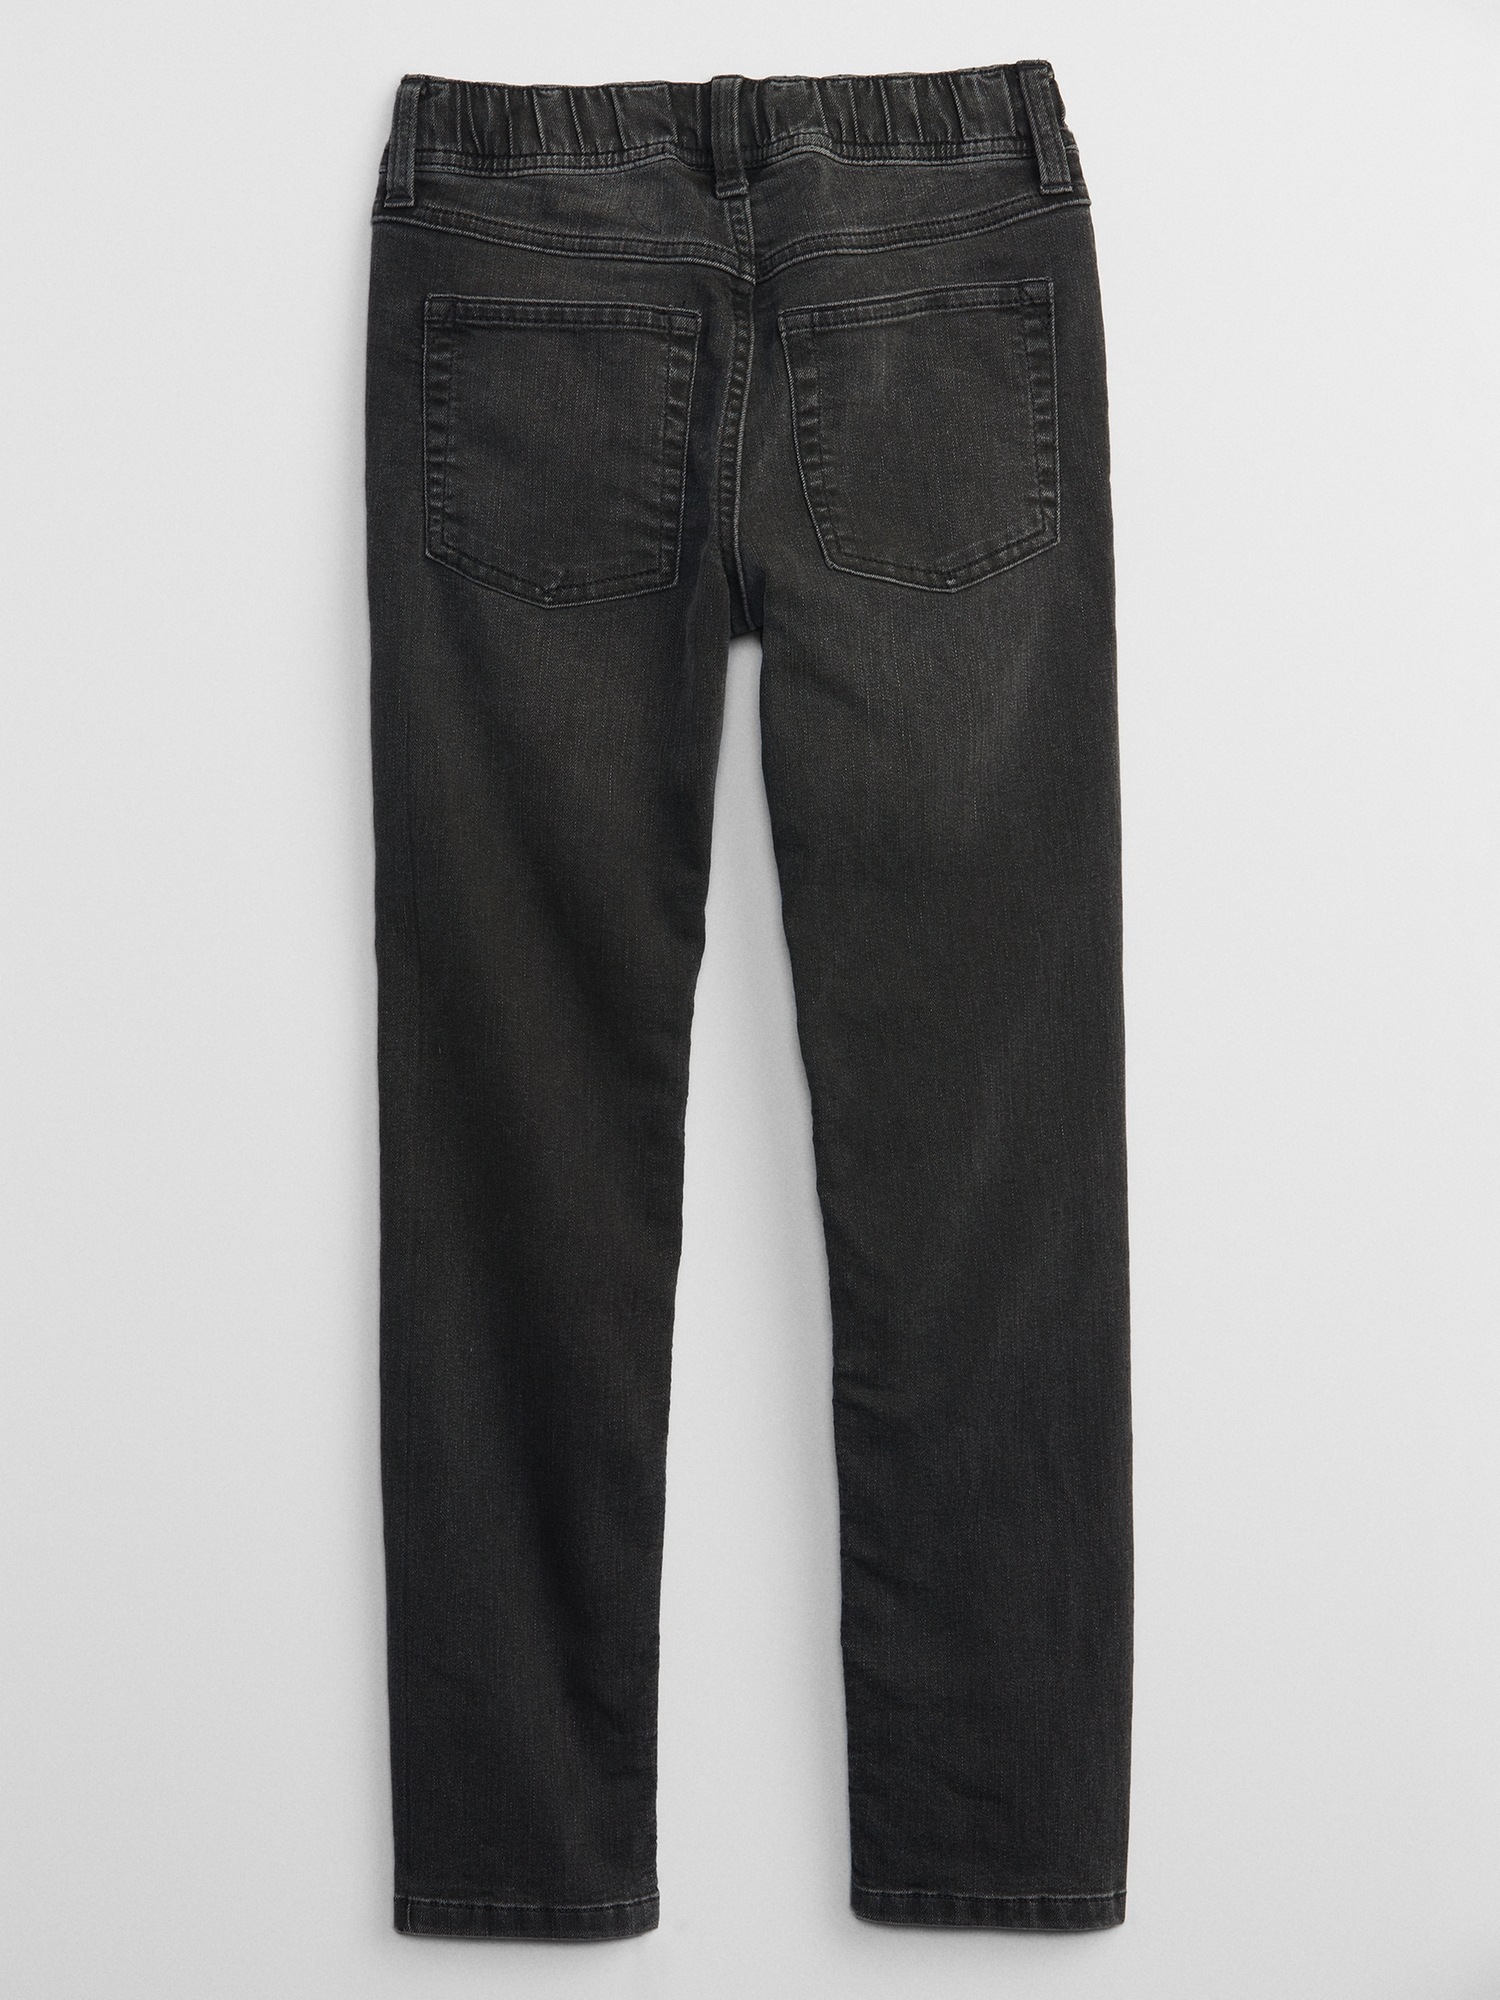 Kids Pull-On Slim Fit Jeans with Washwell | Gap Factory